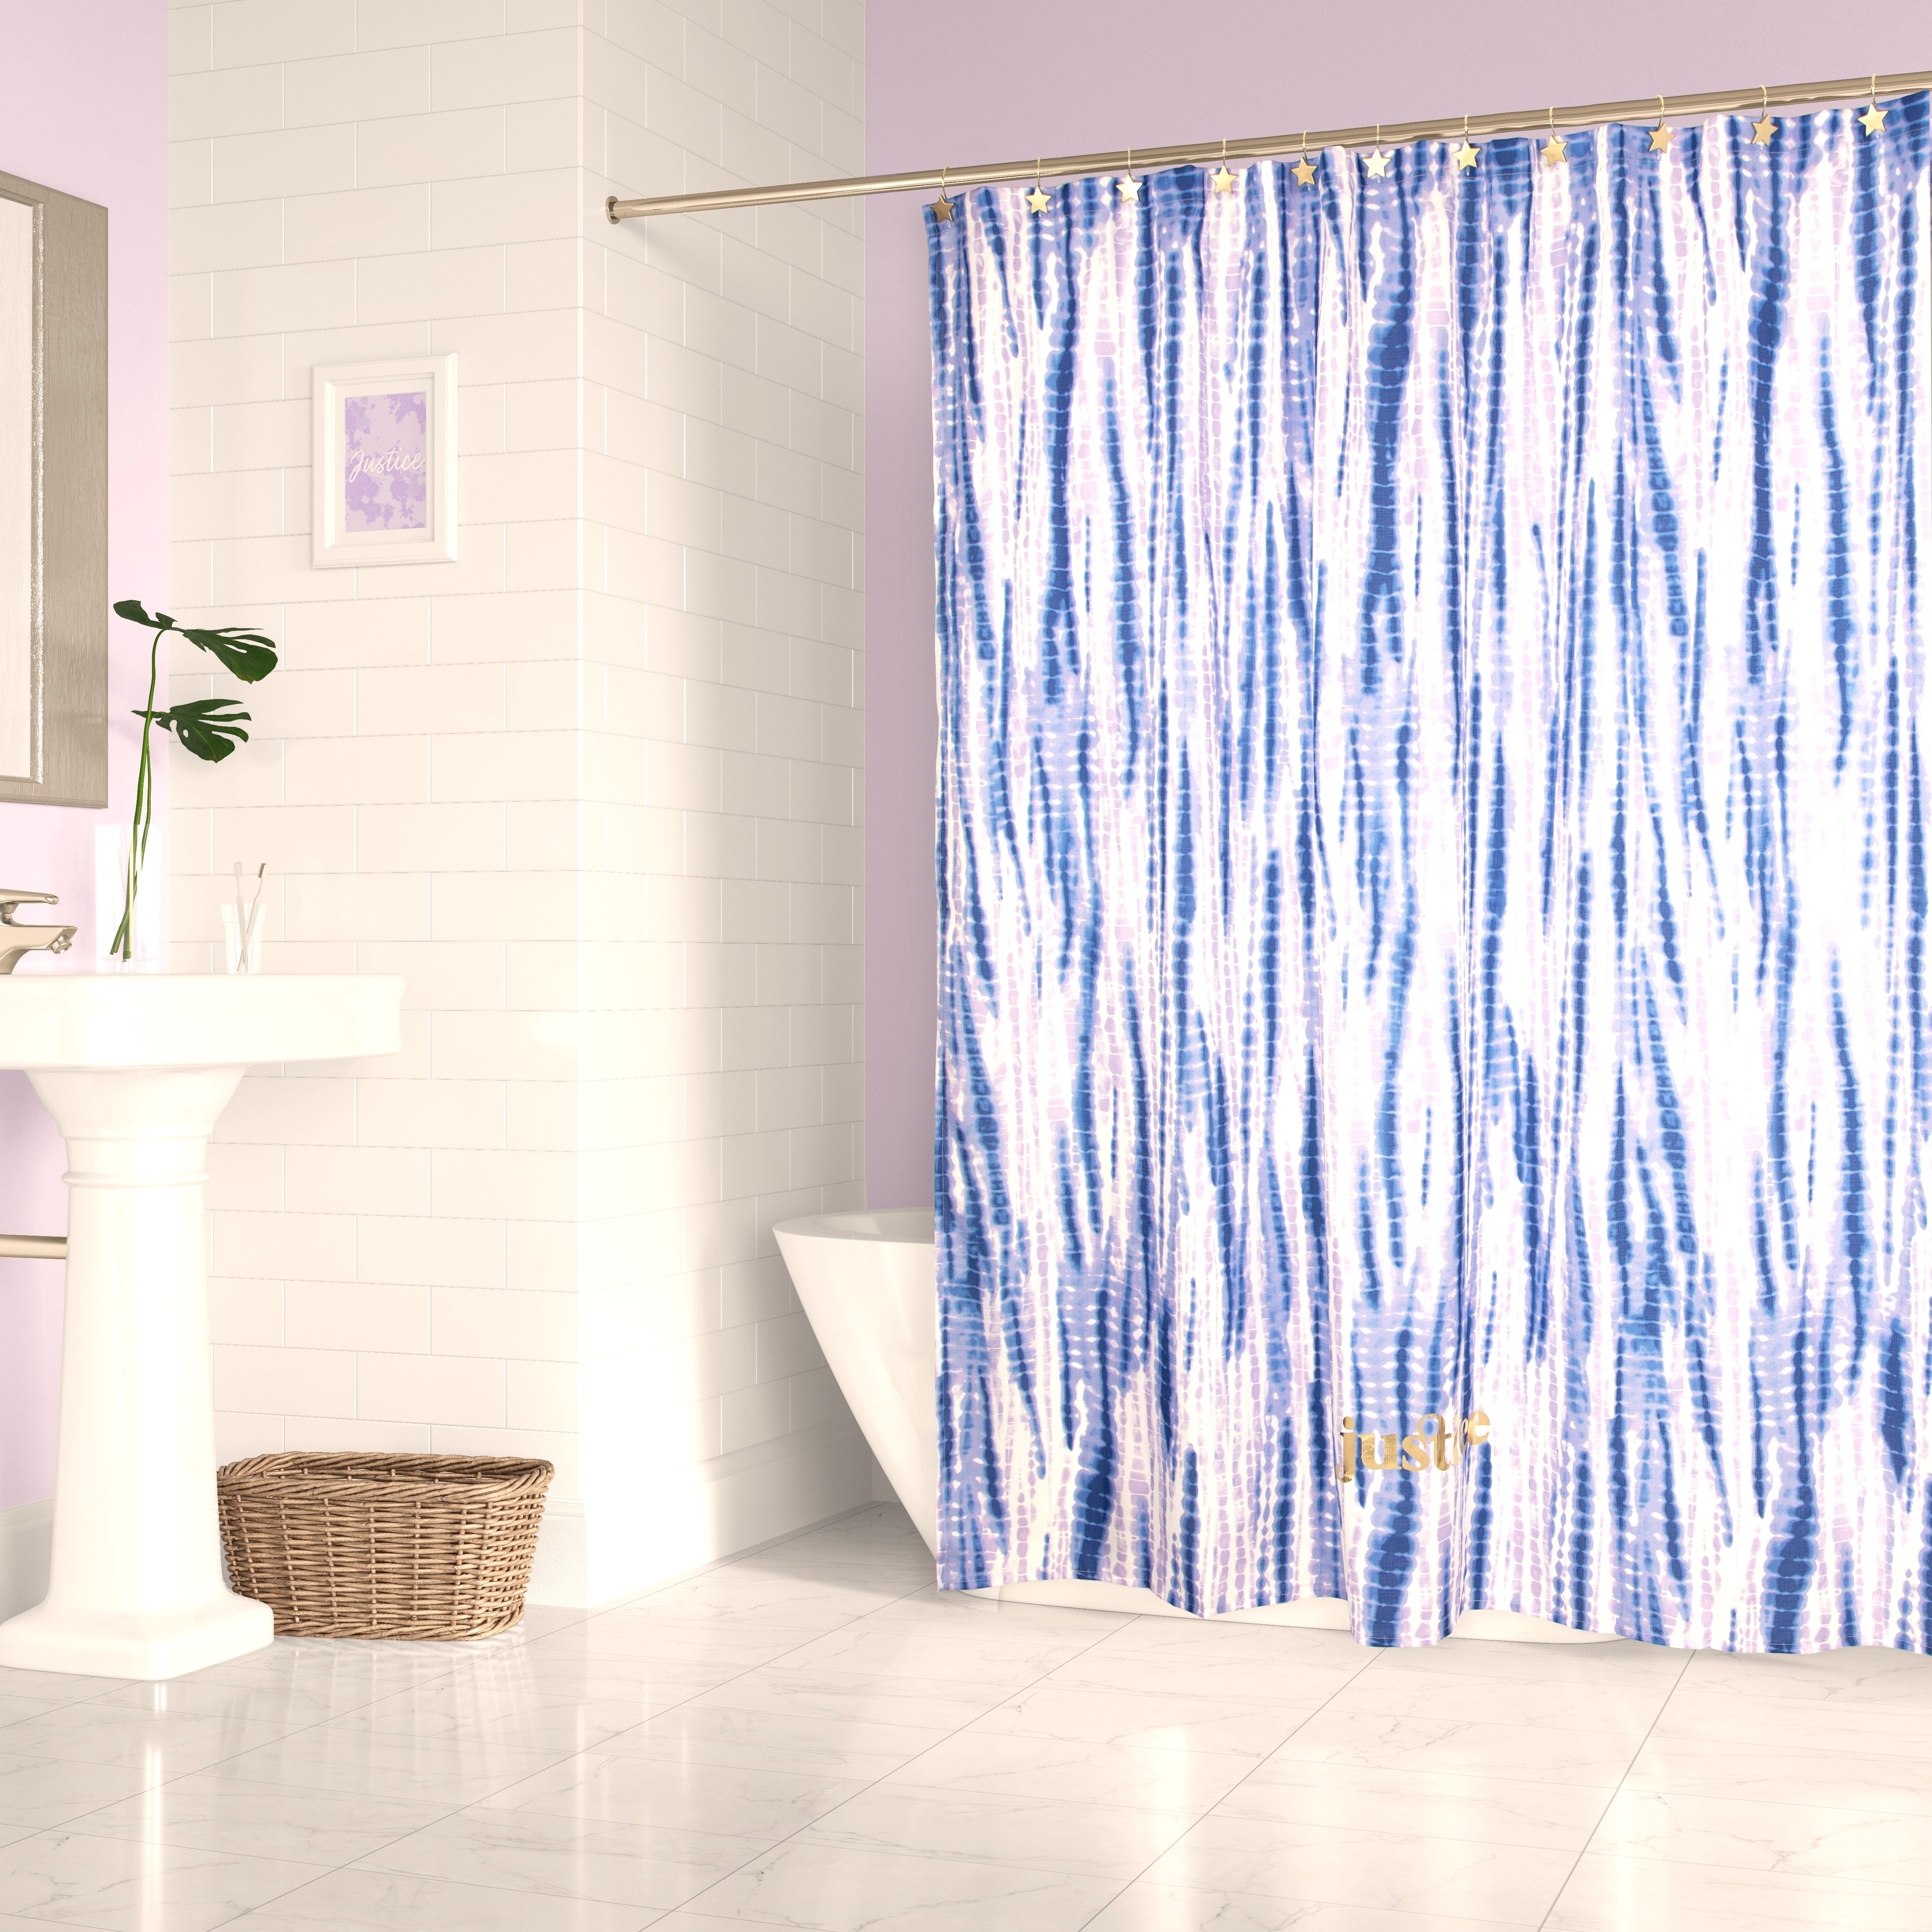 Flying Horse Shower Curtain FREE SHIPPING!! 